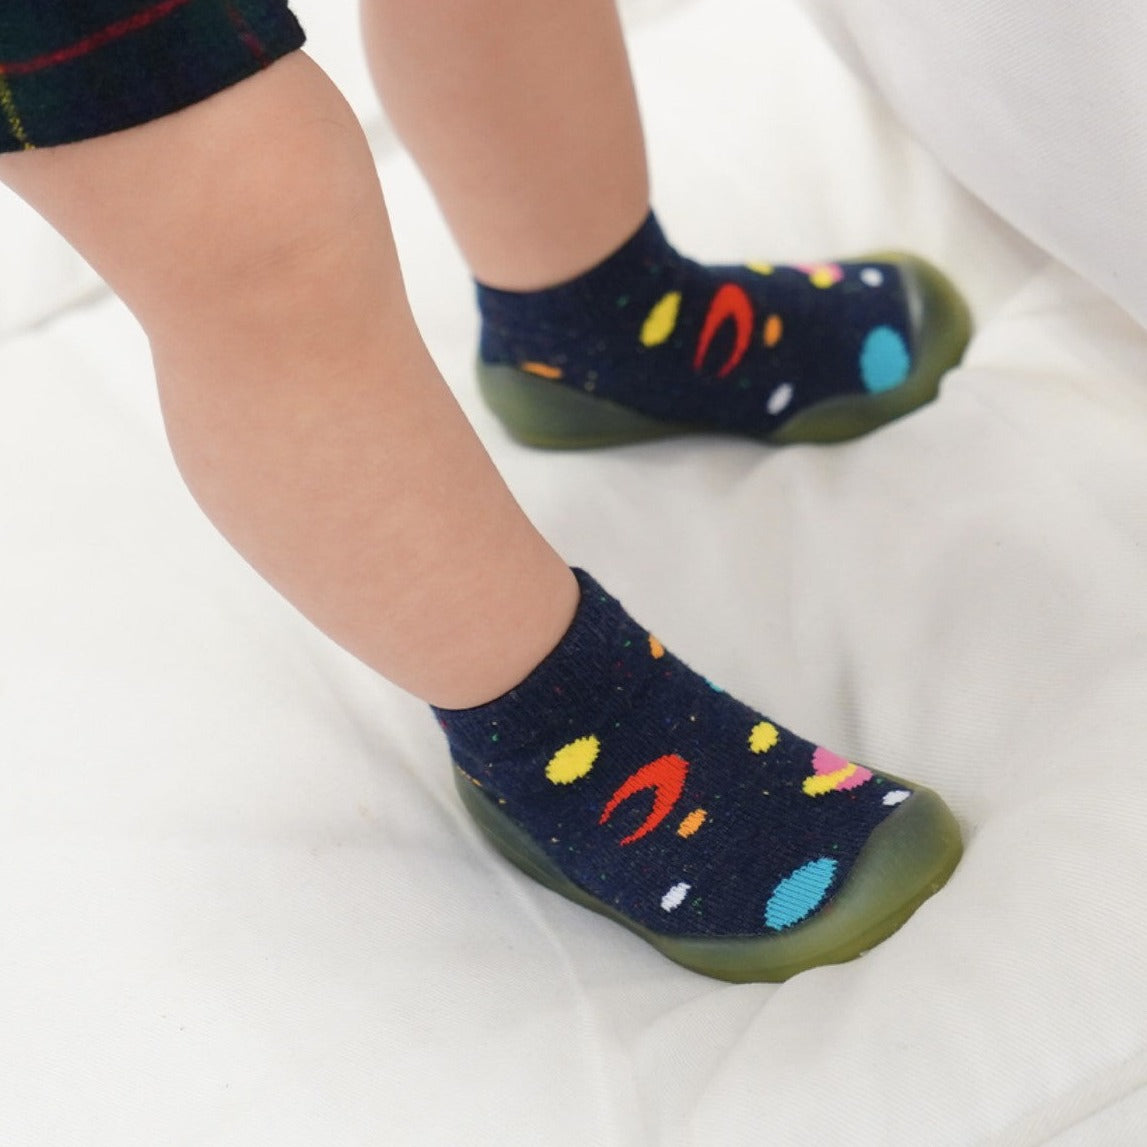 Mars Baby First Walking Shoes: Elastic baby shoes with honeycomb outsole for slip resistance. Gentle flex for delicate baby foot cartilage, lightweight design for growth and learning to walk.